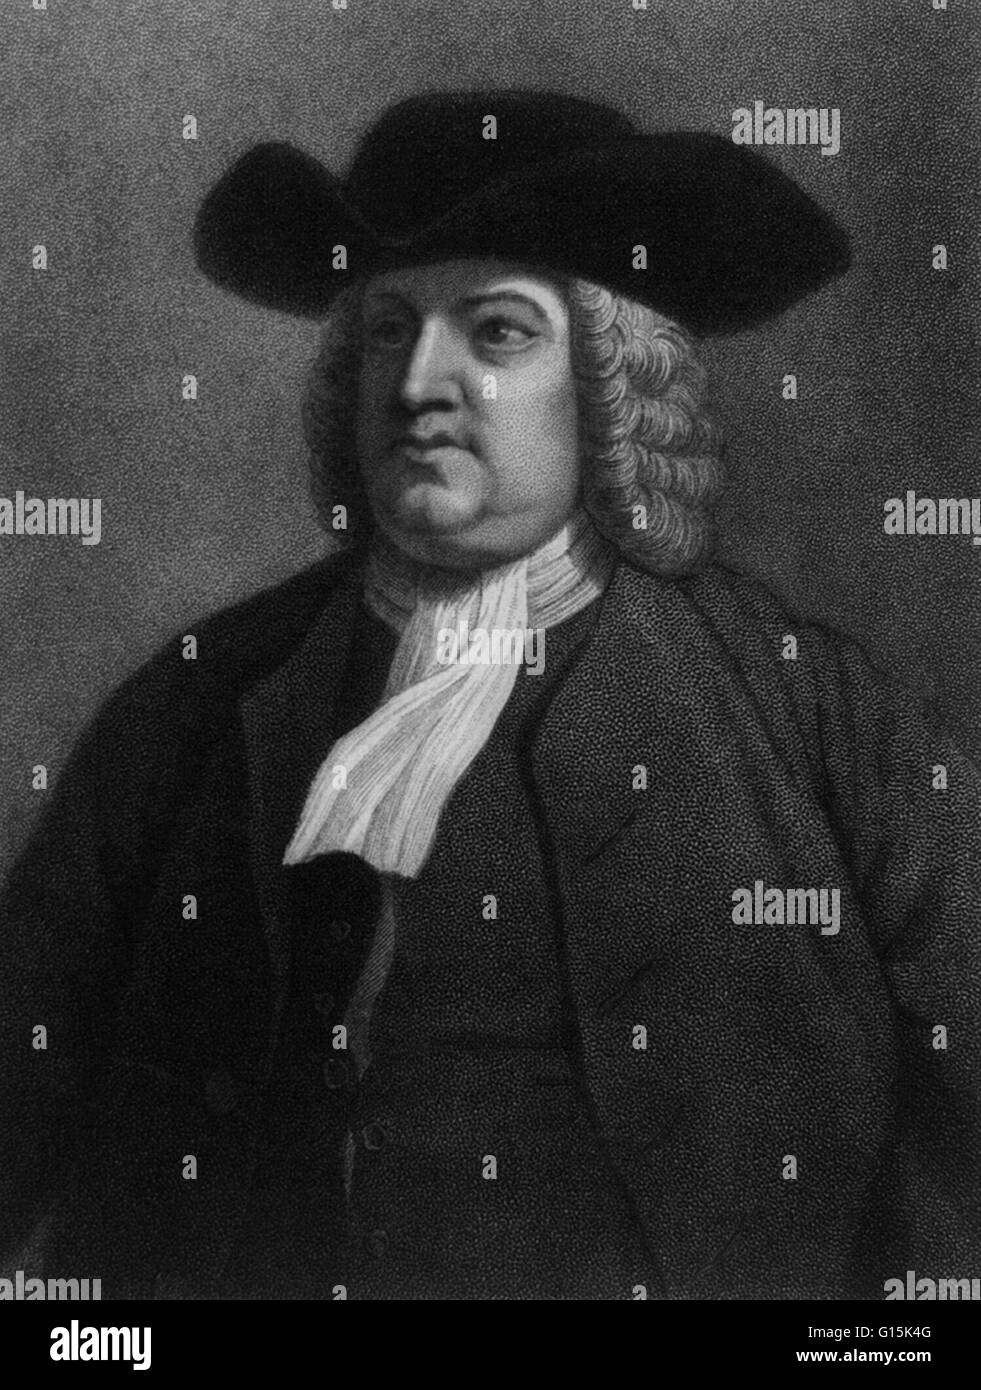 Portrait of William Penn (1644-1718), English real estate entrepreneur, philosopher, and founder of Pennsylvania. He was an early champion of democracy and religious freedom, notable for his good relations and successful treaties with the Lenape Indians. Stock Photo